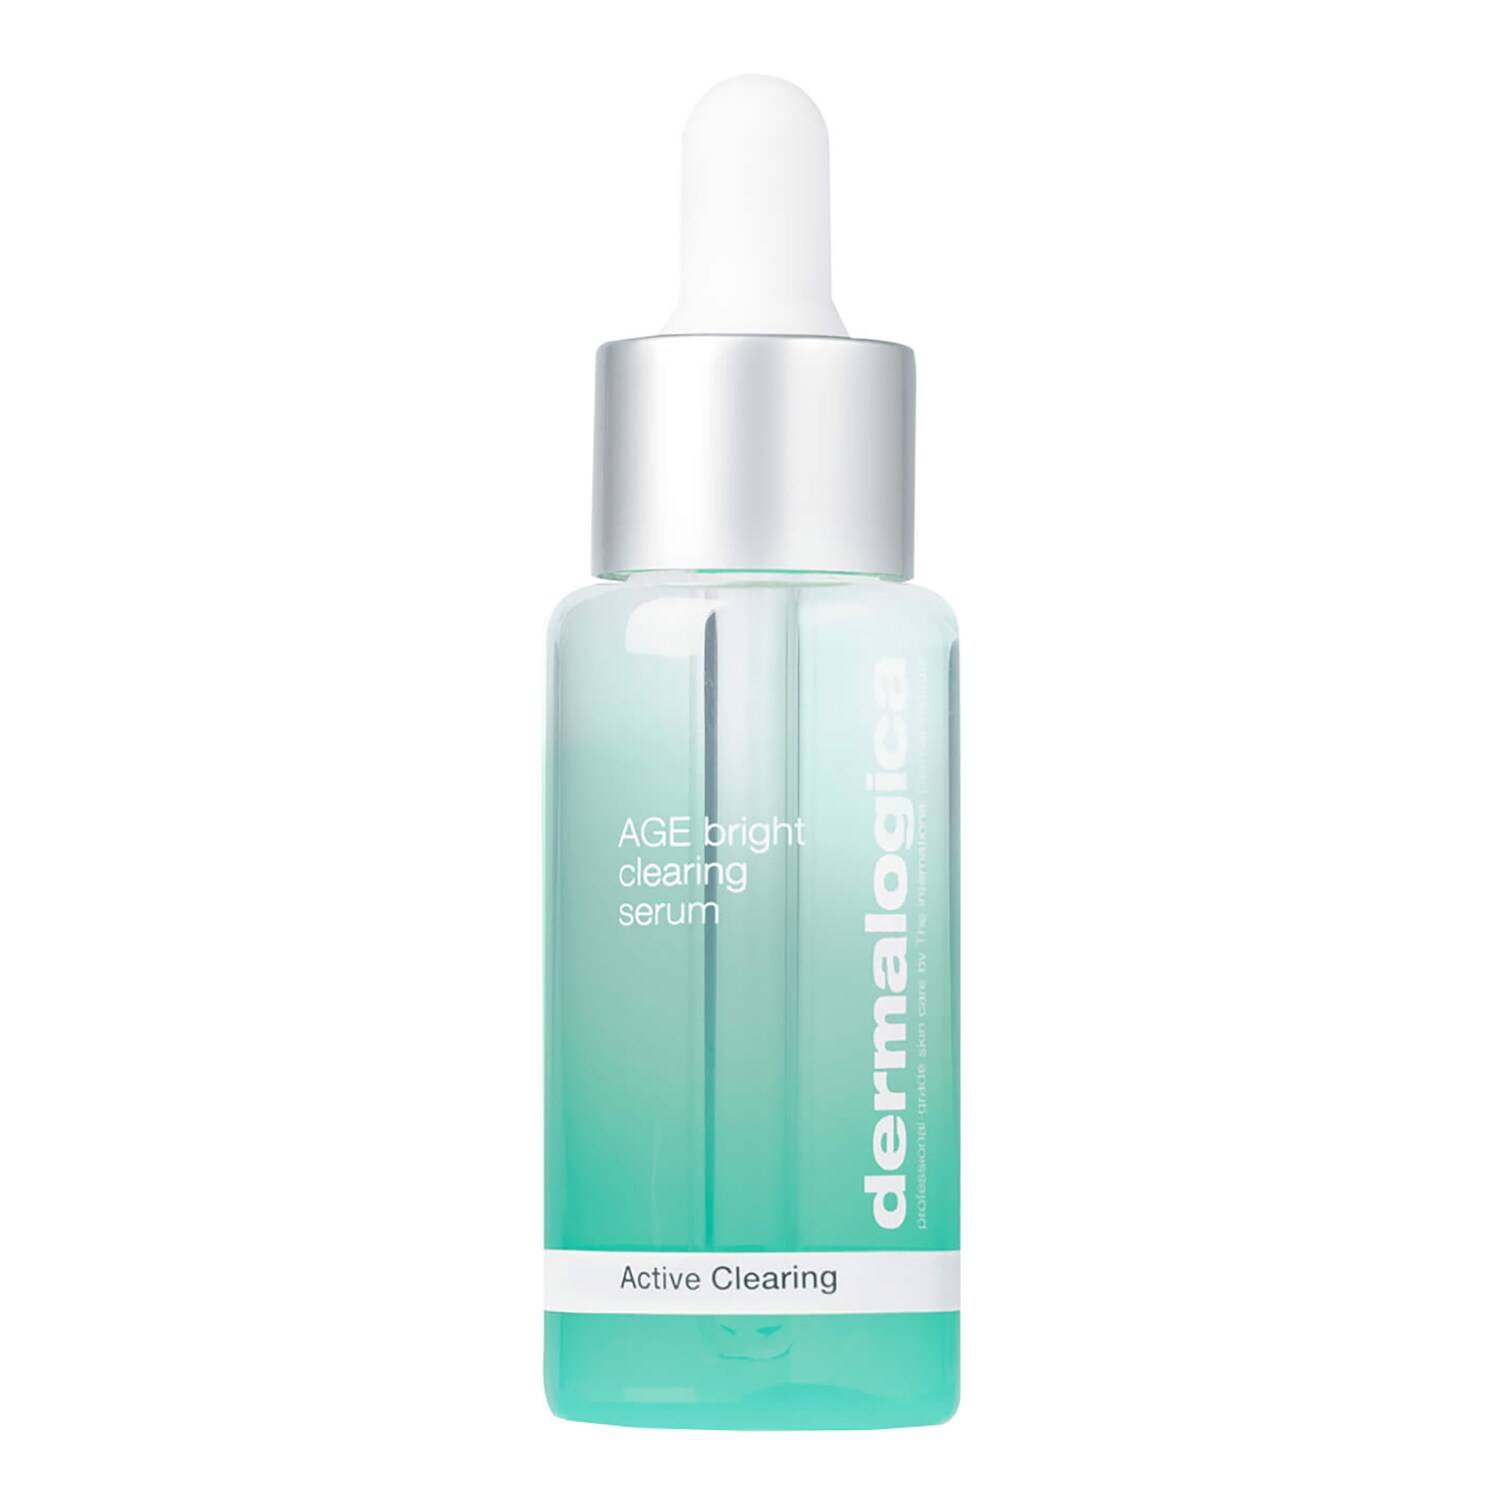 Dermalogica Active Clearing Age Bright Clearing Serum 30Ml